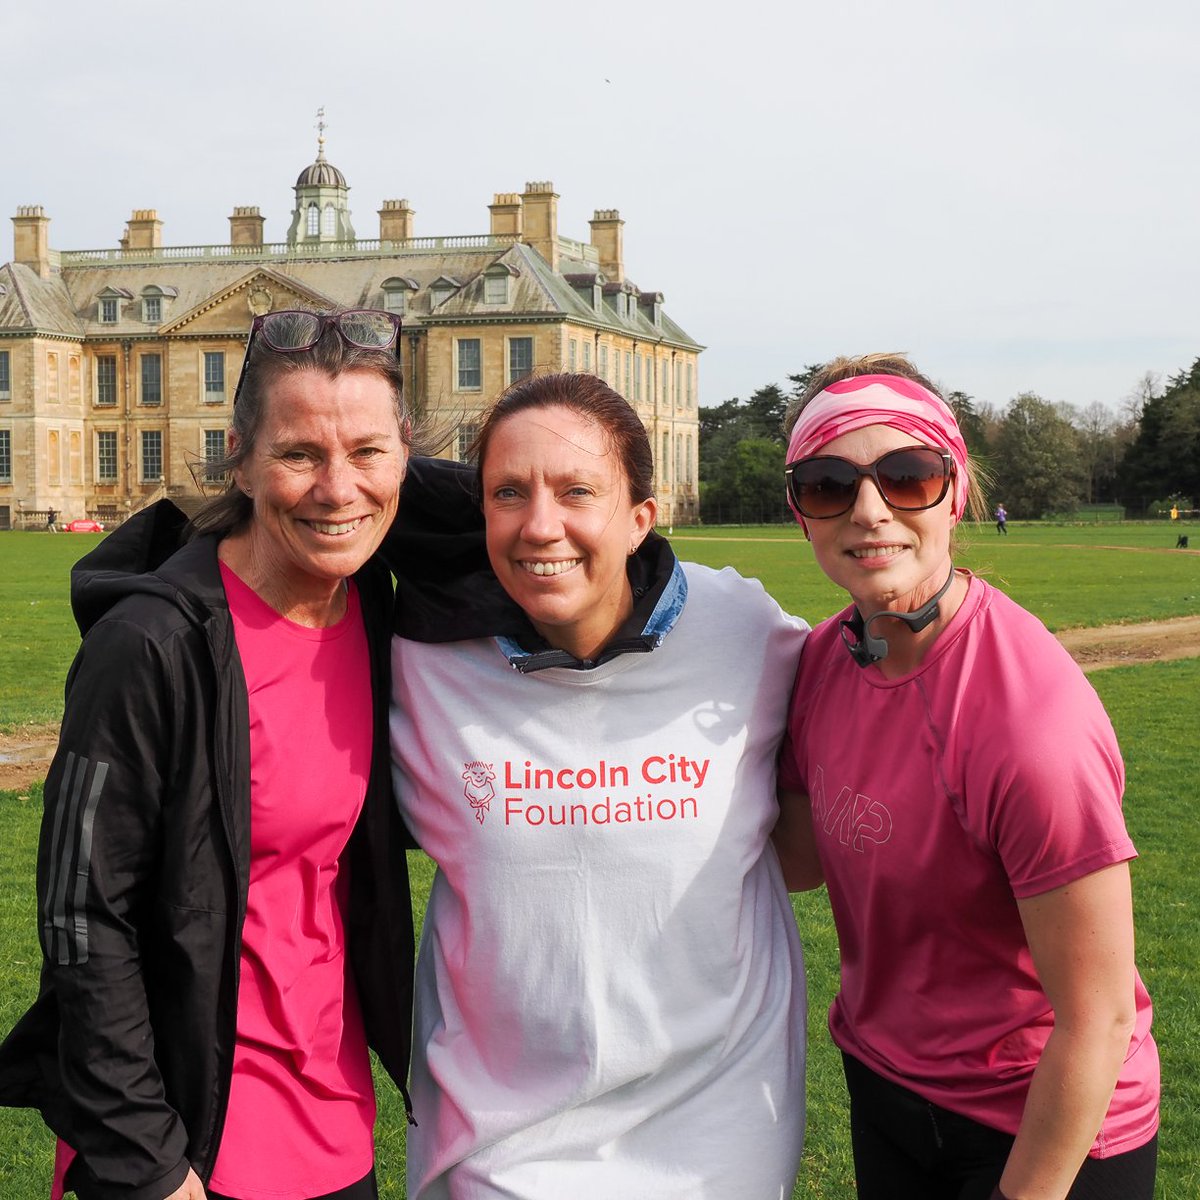 🏃‍♀️ Following a hugely successful launch last month, our Fighting Fit 5k group will return to Belton House on Saturday 4 May! ℹ️ For more information on how to get involved visit: tinyurl.com/2p943wc7 #WeAreImps